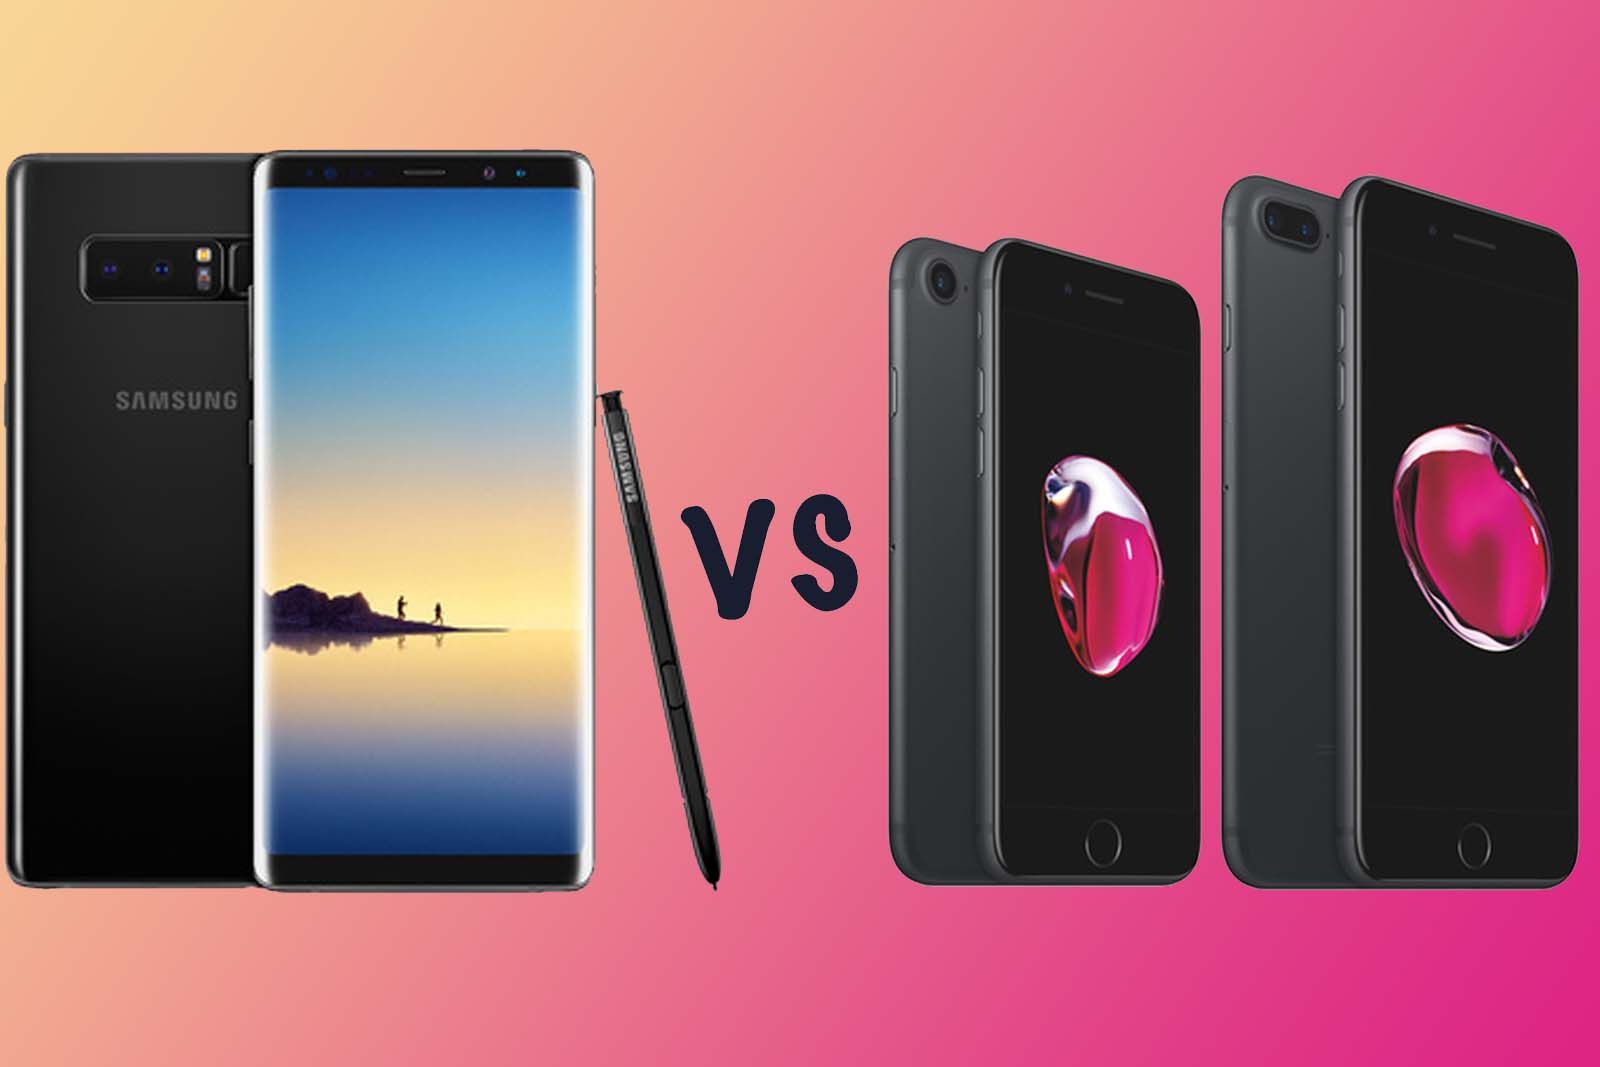 Samsung Galaxy Note 8 vs Apple iPhone 7 vs iPhone 7 Plus Whats the difference image 1